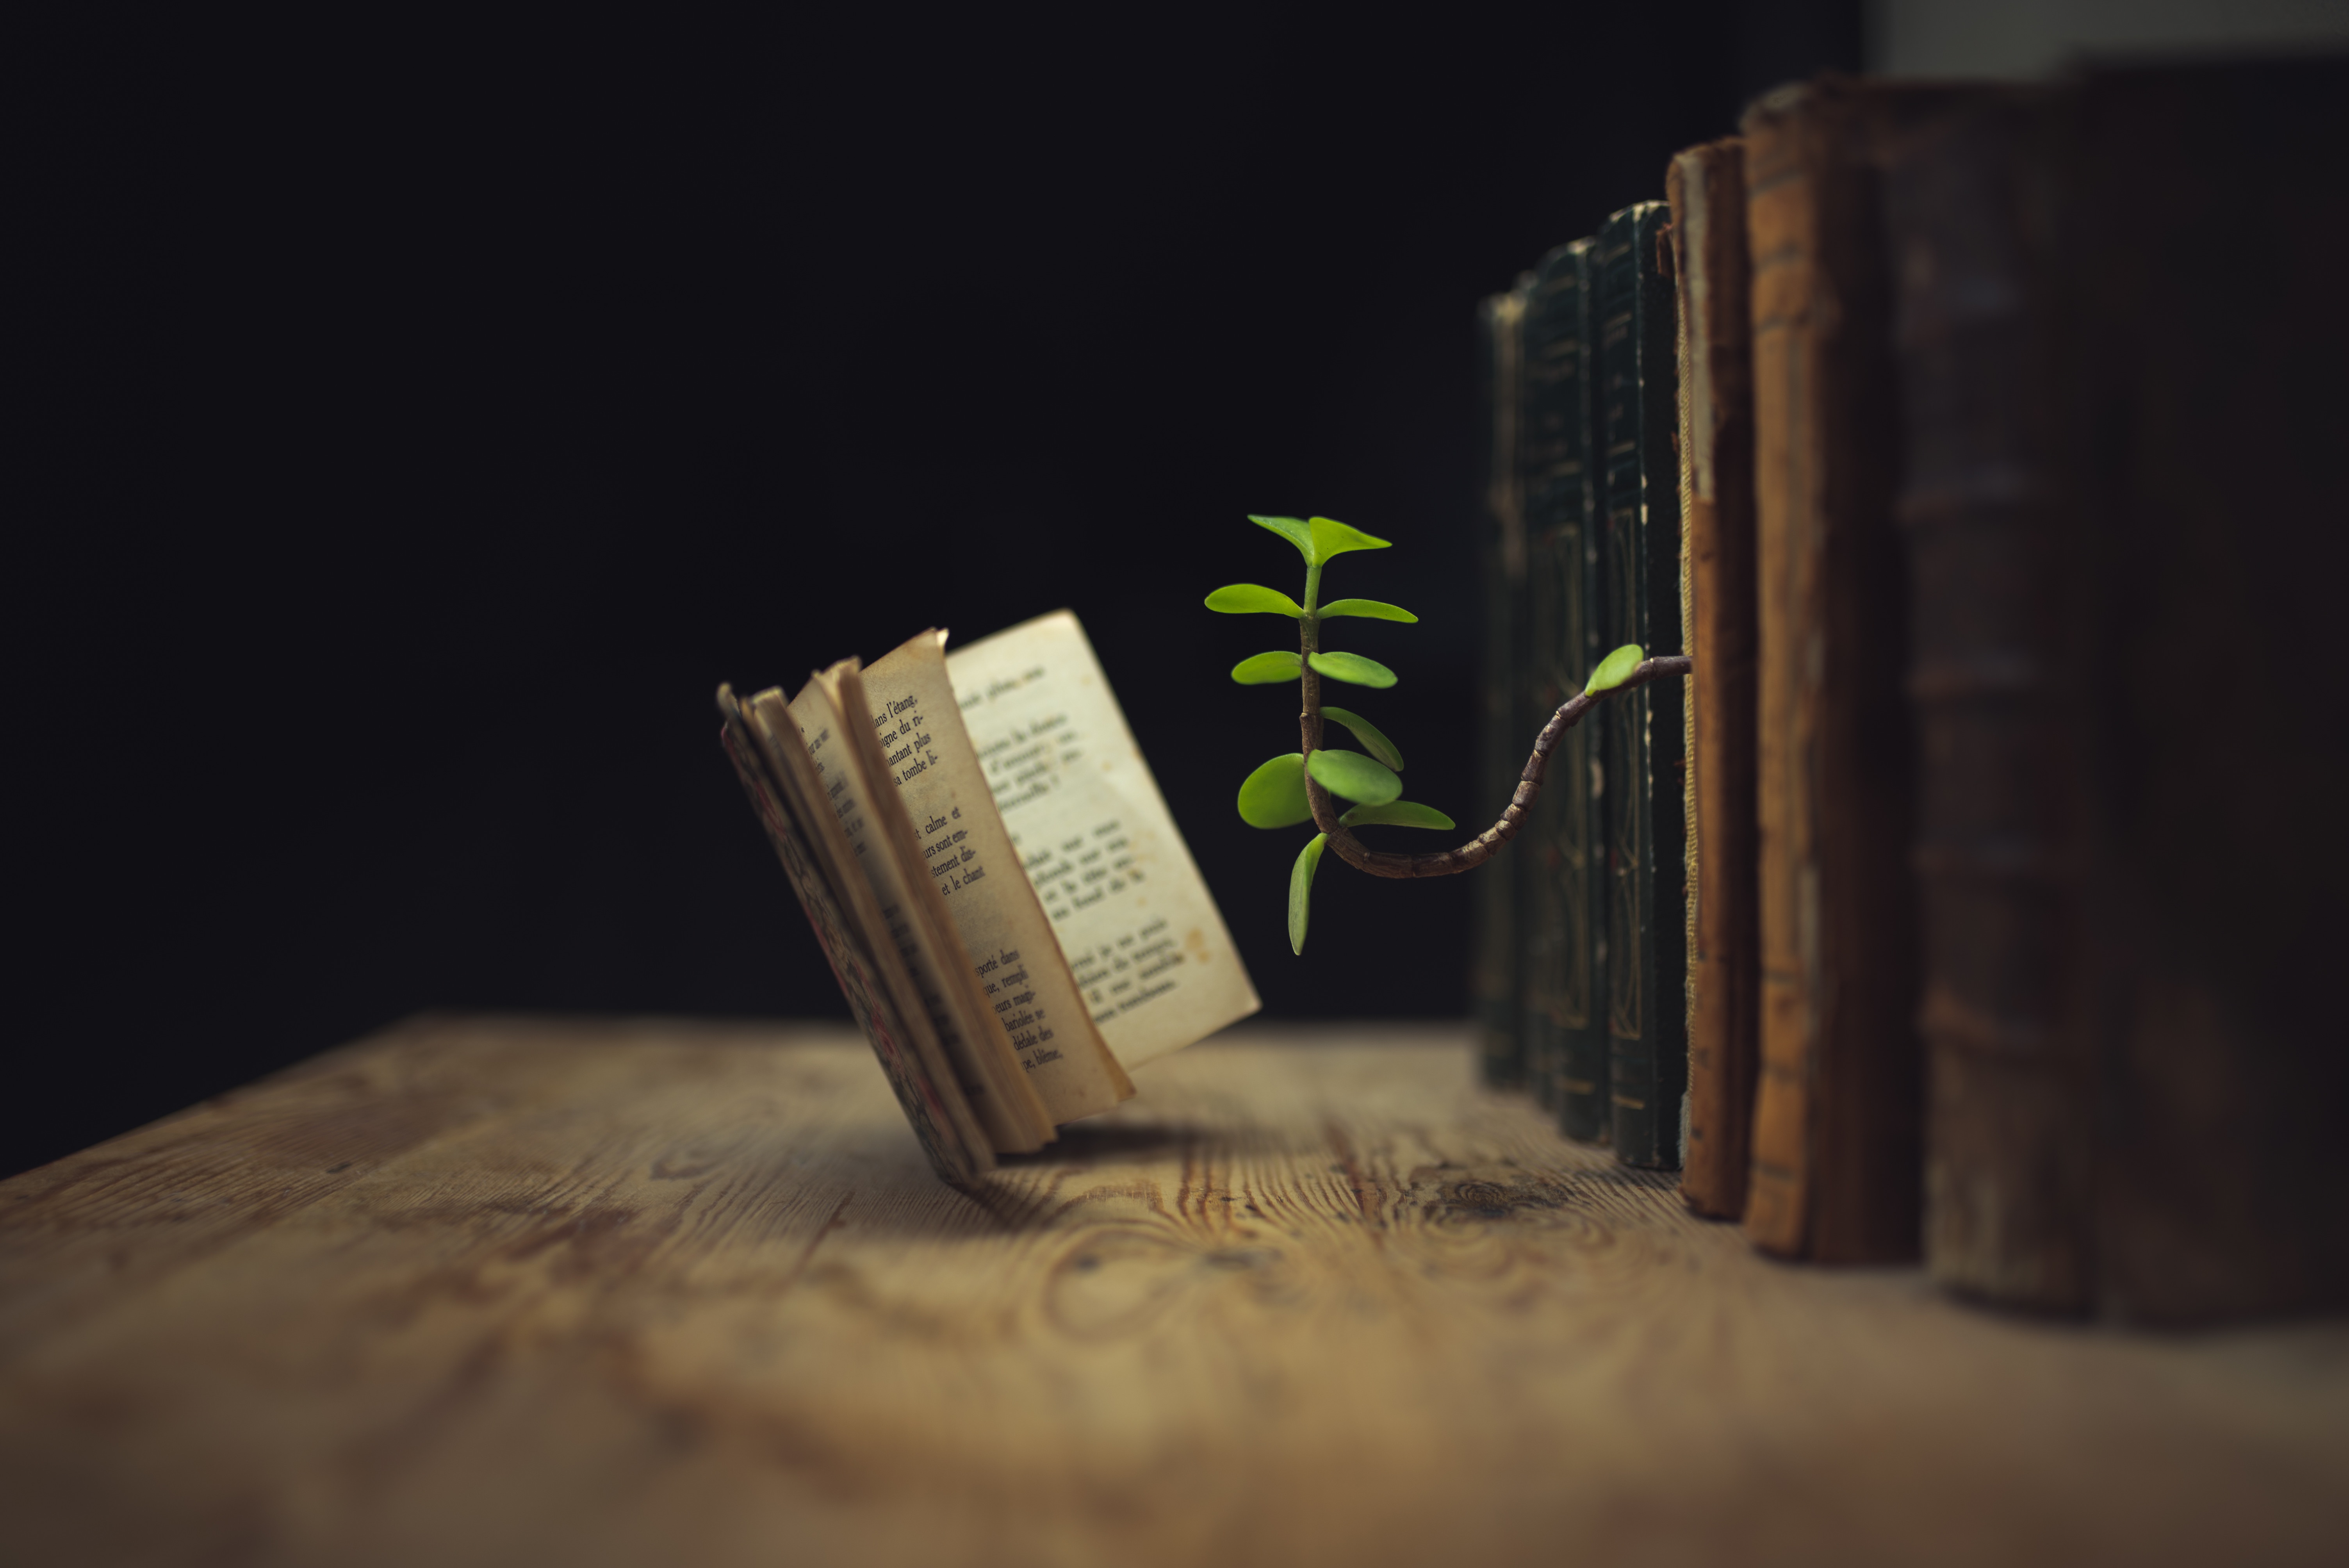 photography, manipulation, book, sprout 5K